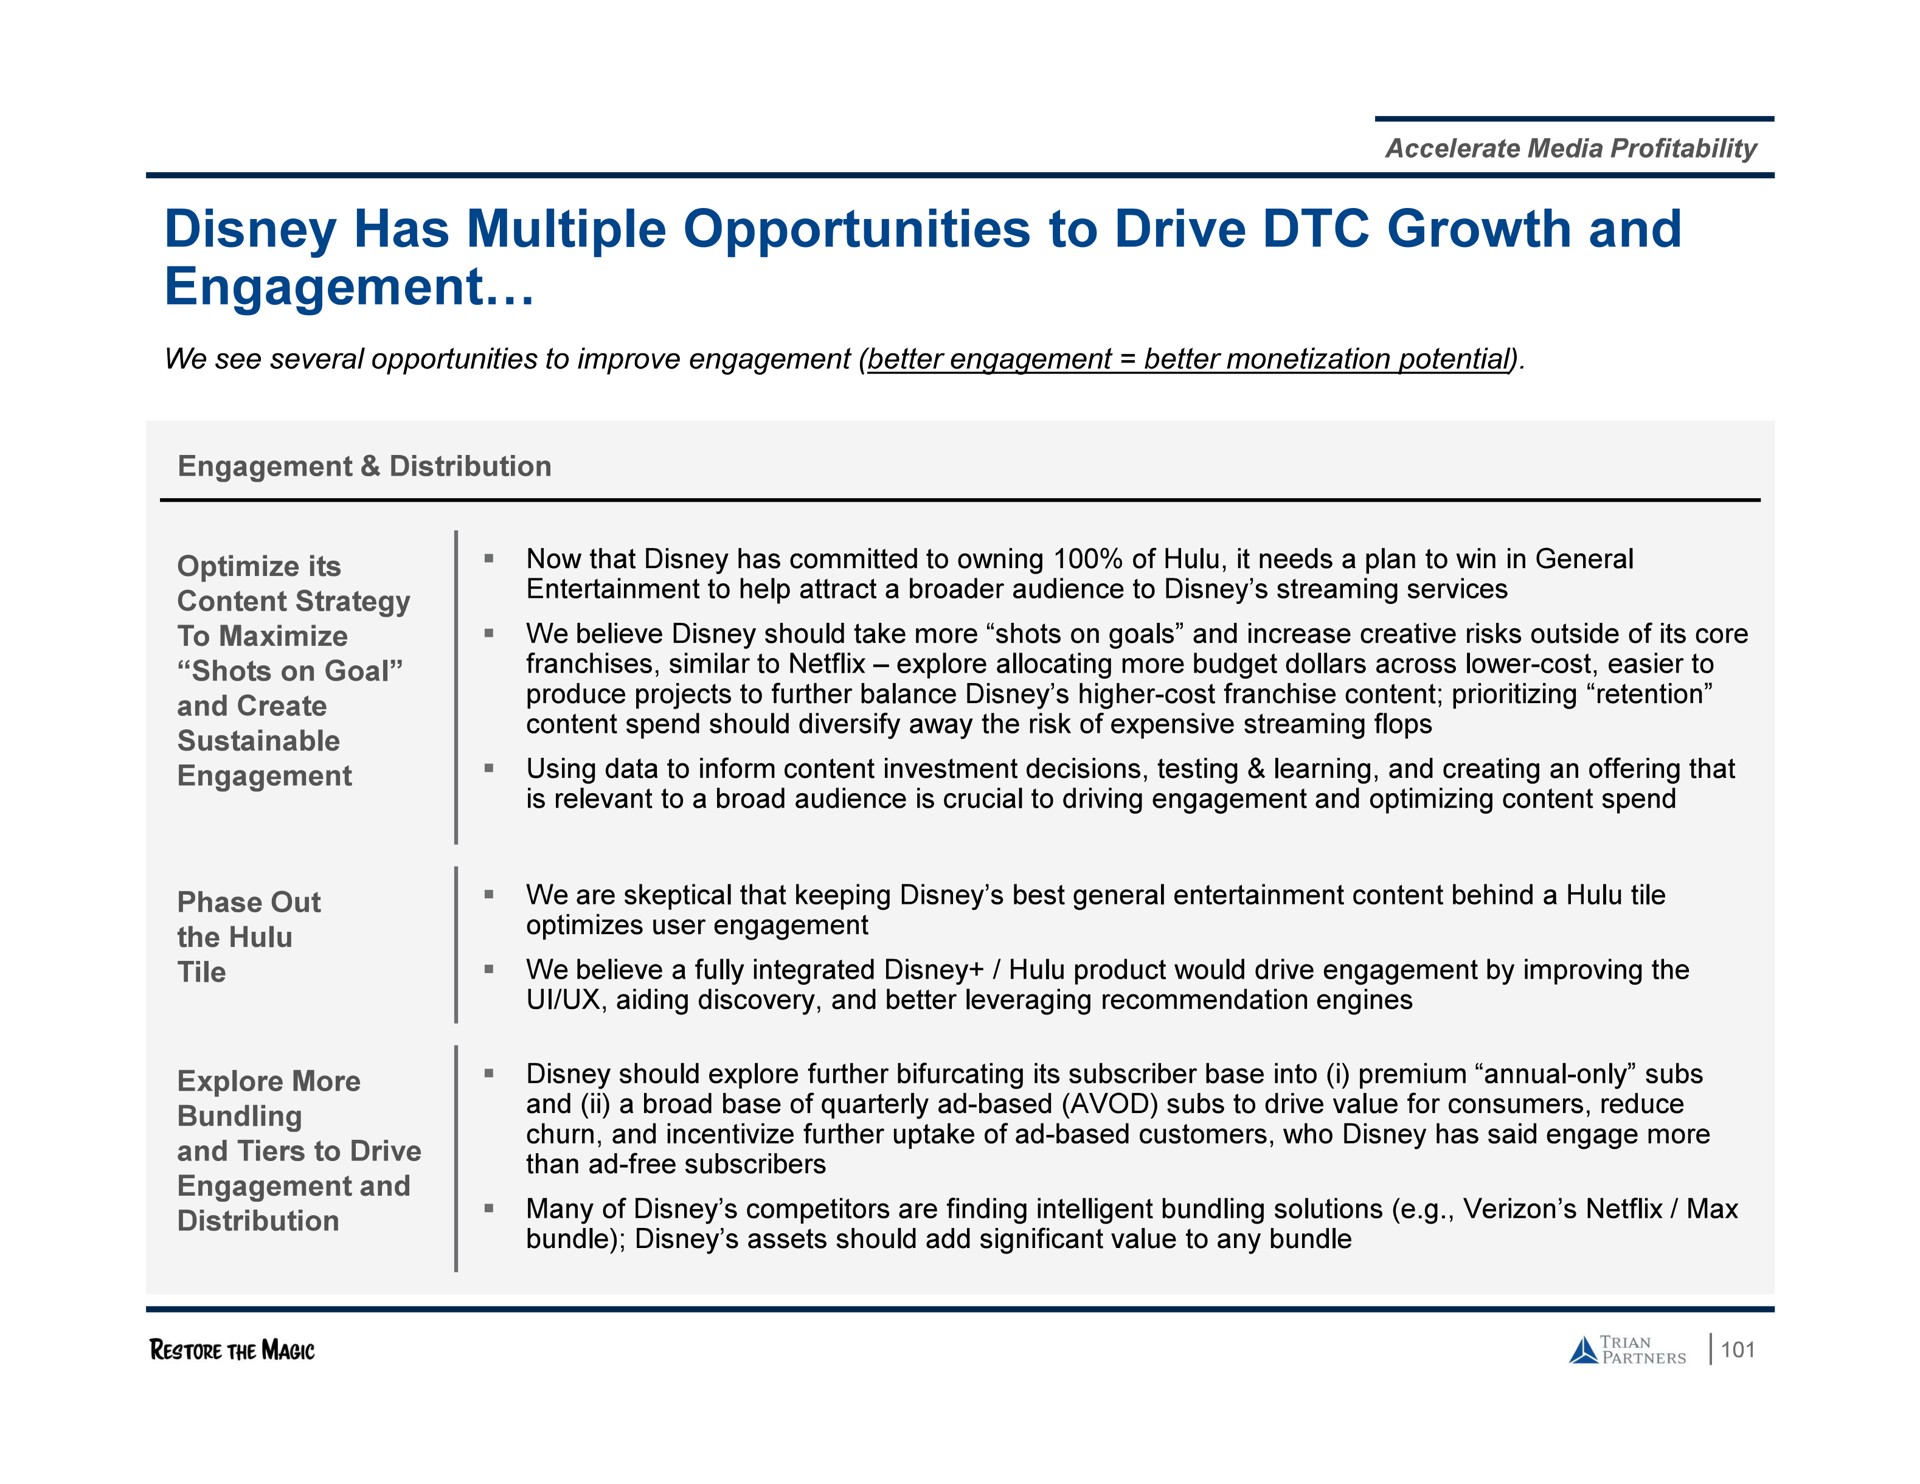 has multiple opportunities to drive growth and engagement | Trian Partners